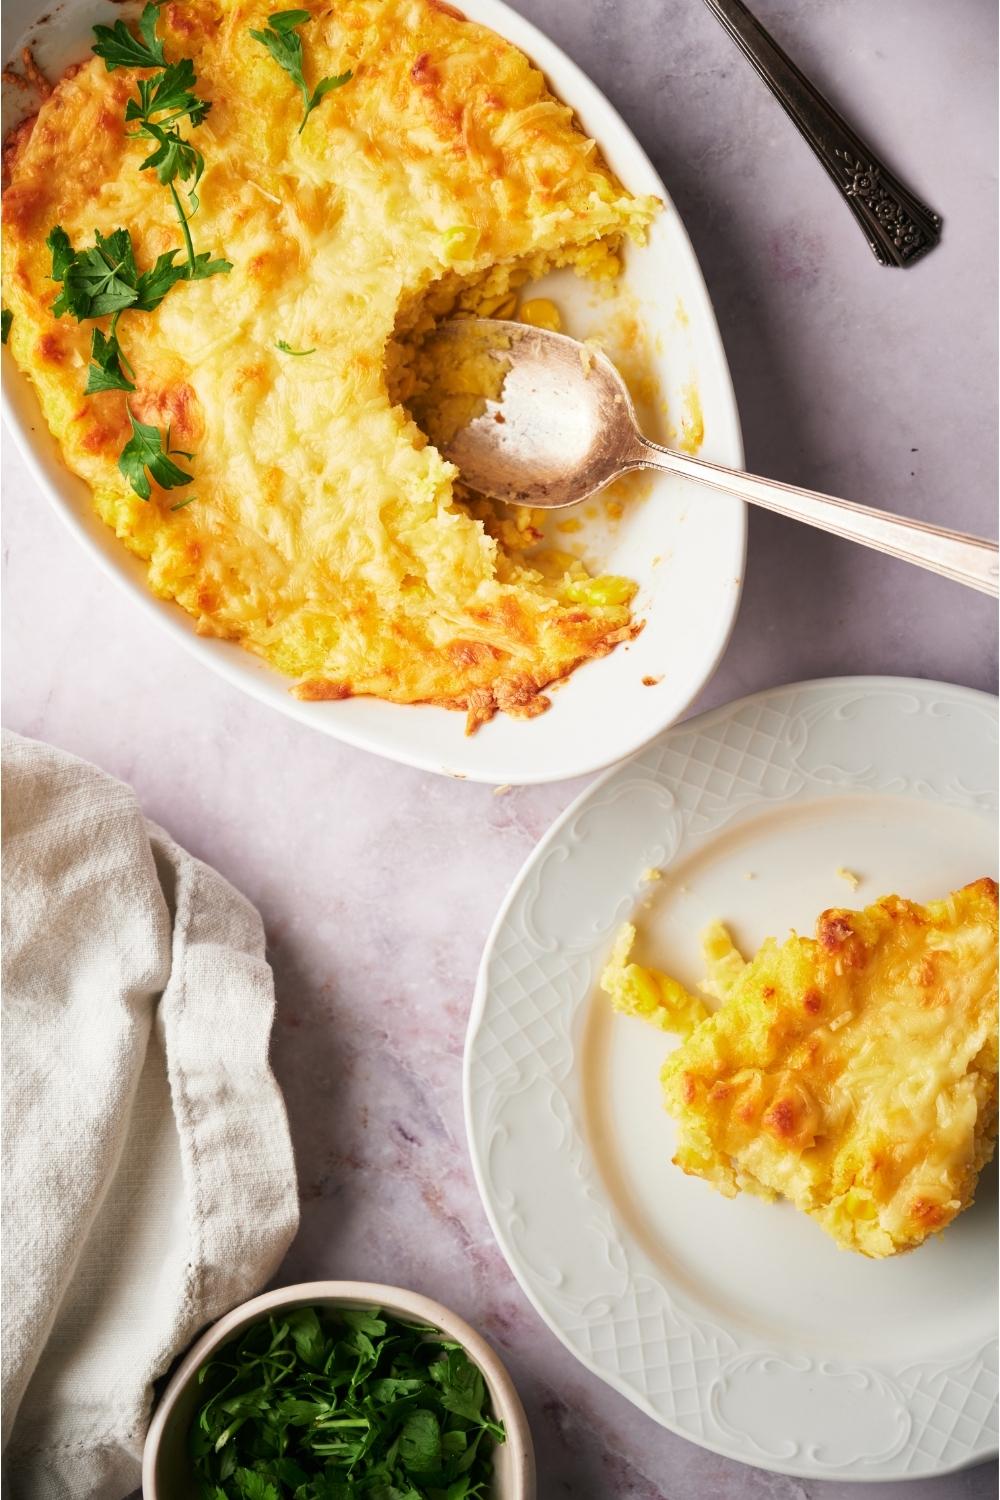 Paula Deen's corn casserole with a serving spoon and a serving of casserole on a second plate